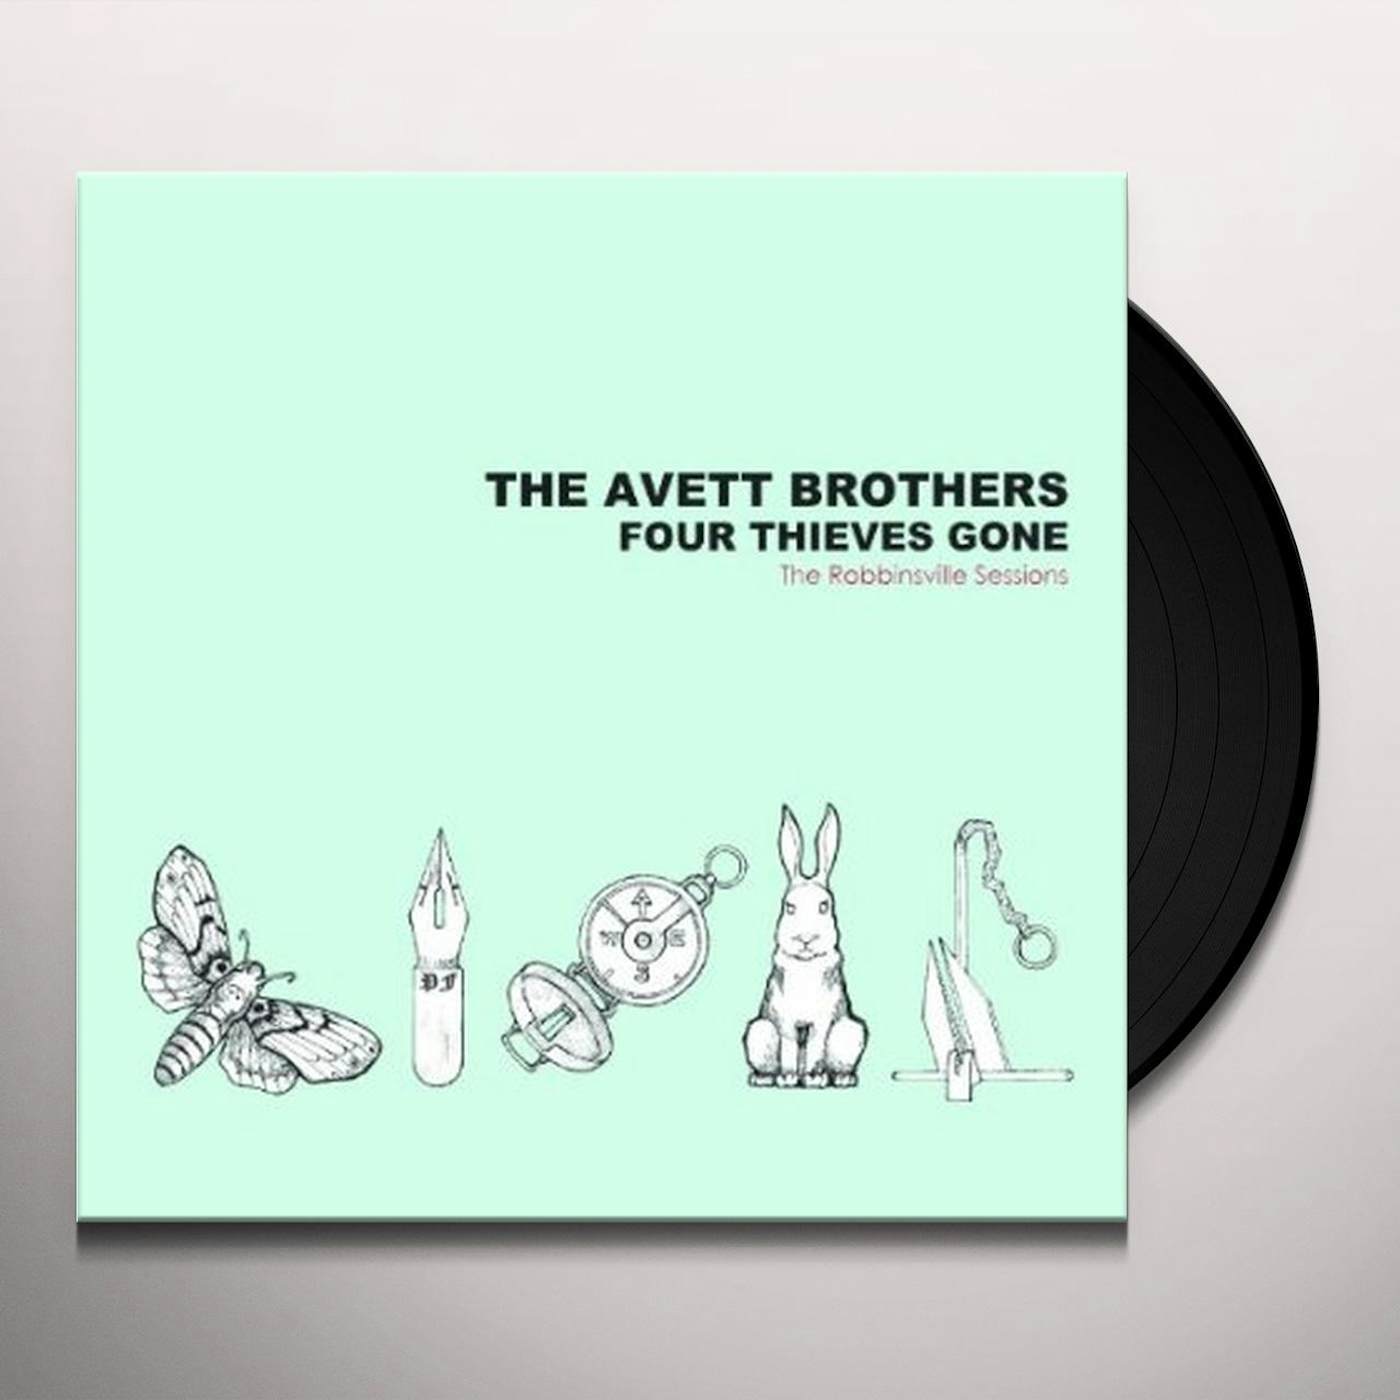 The Avett Brothers FOUR THIEVES GONE: ROBBINSVILLE SESSIONS Vinyl Record